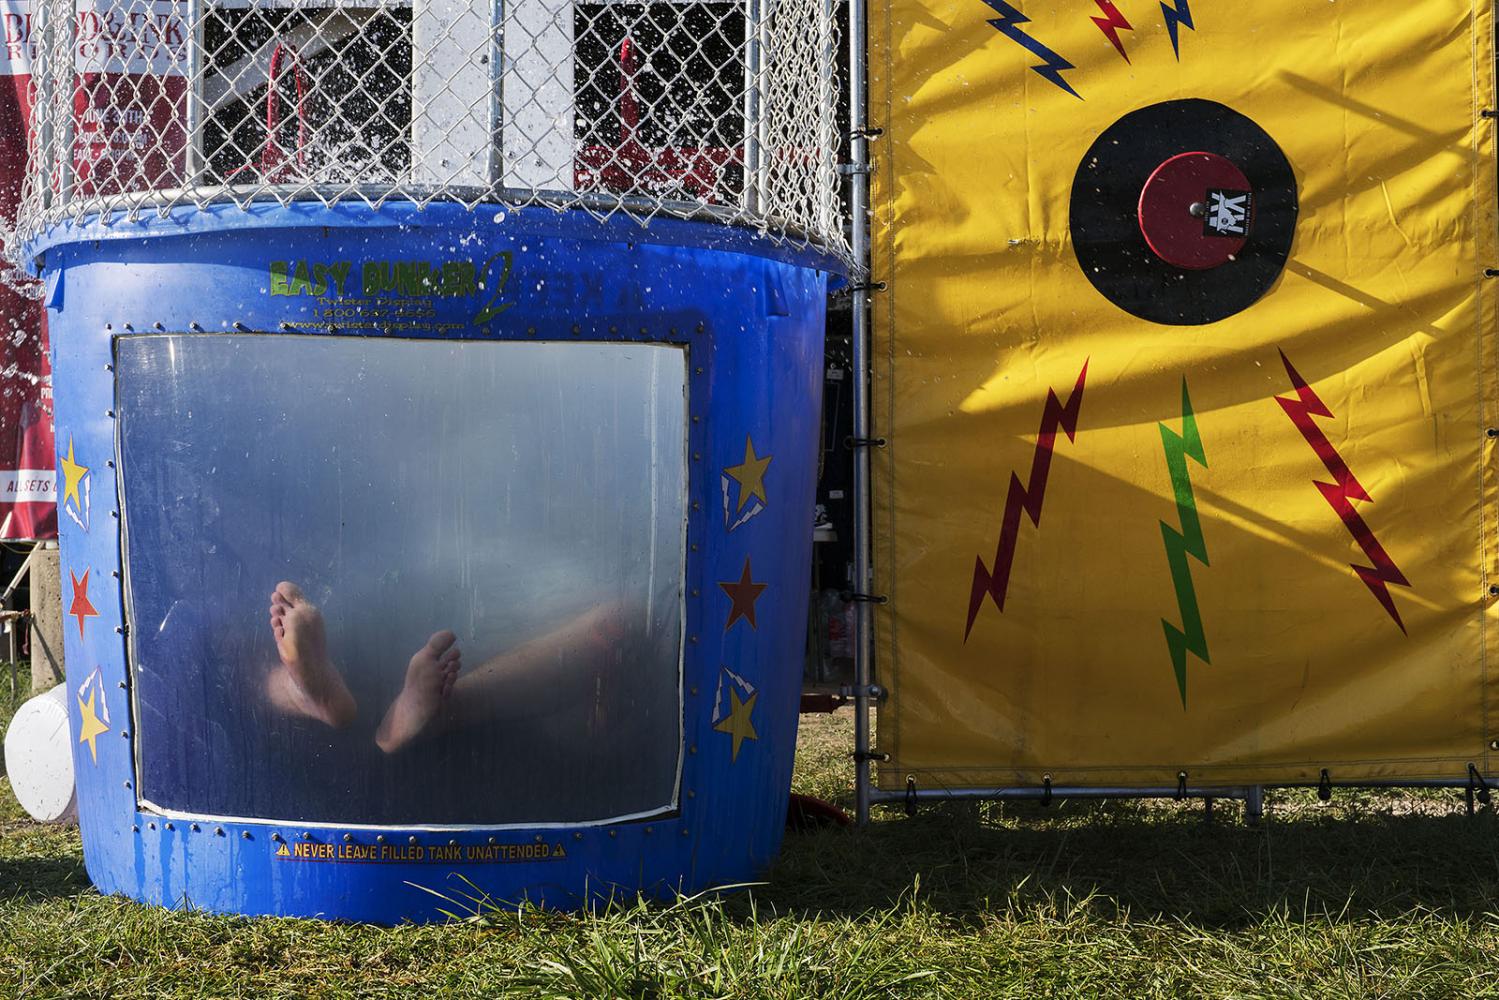 A member of the Blood &amp; Ink label gets dunked in a dunk tank at Audiofeed Festival in Urbana, Illinois on Saturday, July 1, 2017. &copy; 2017 KC McGinnis